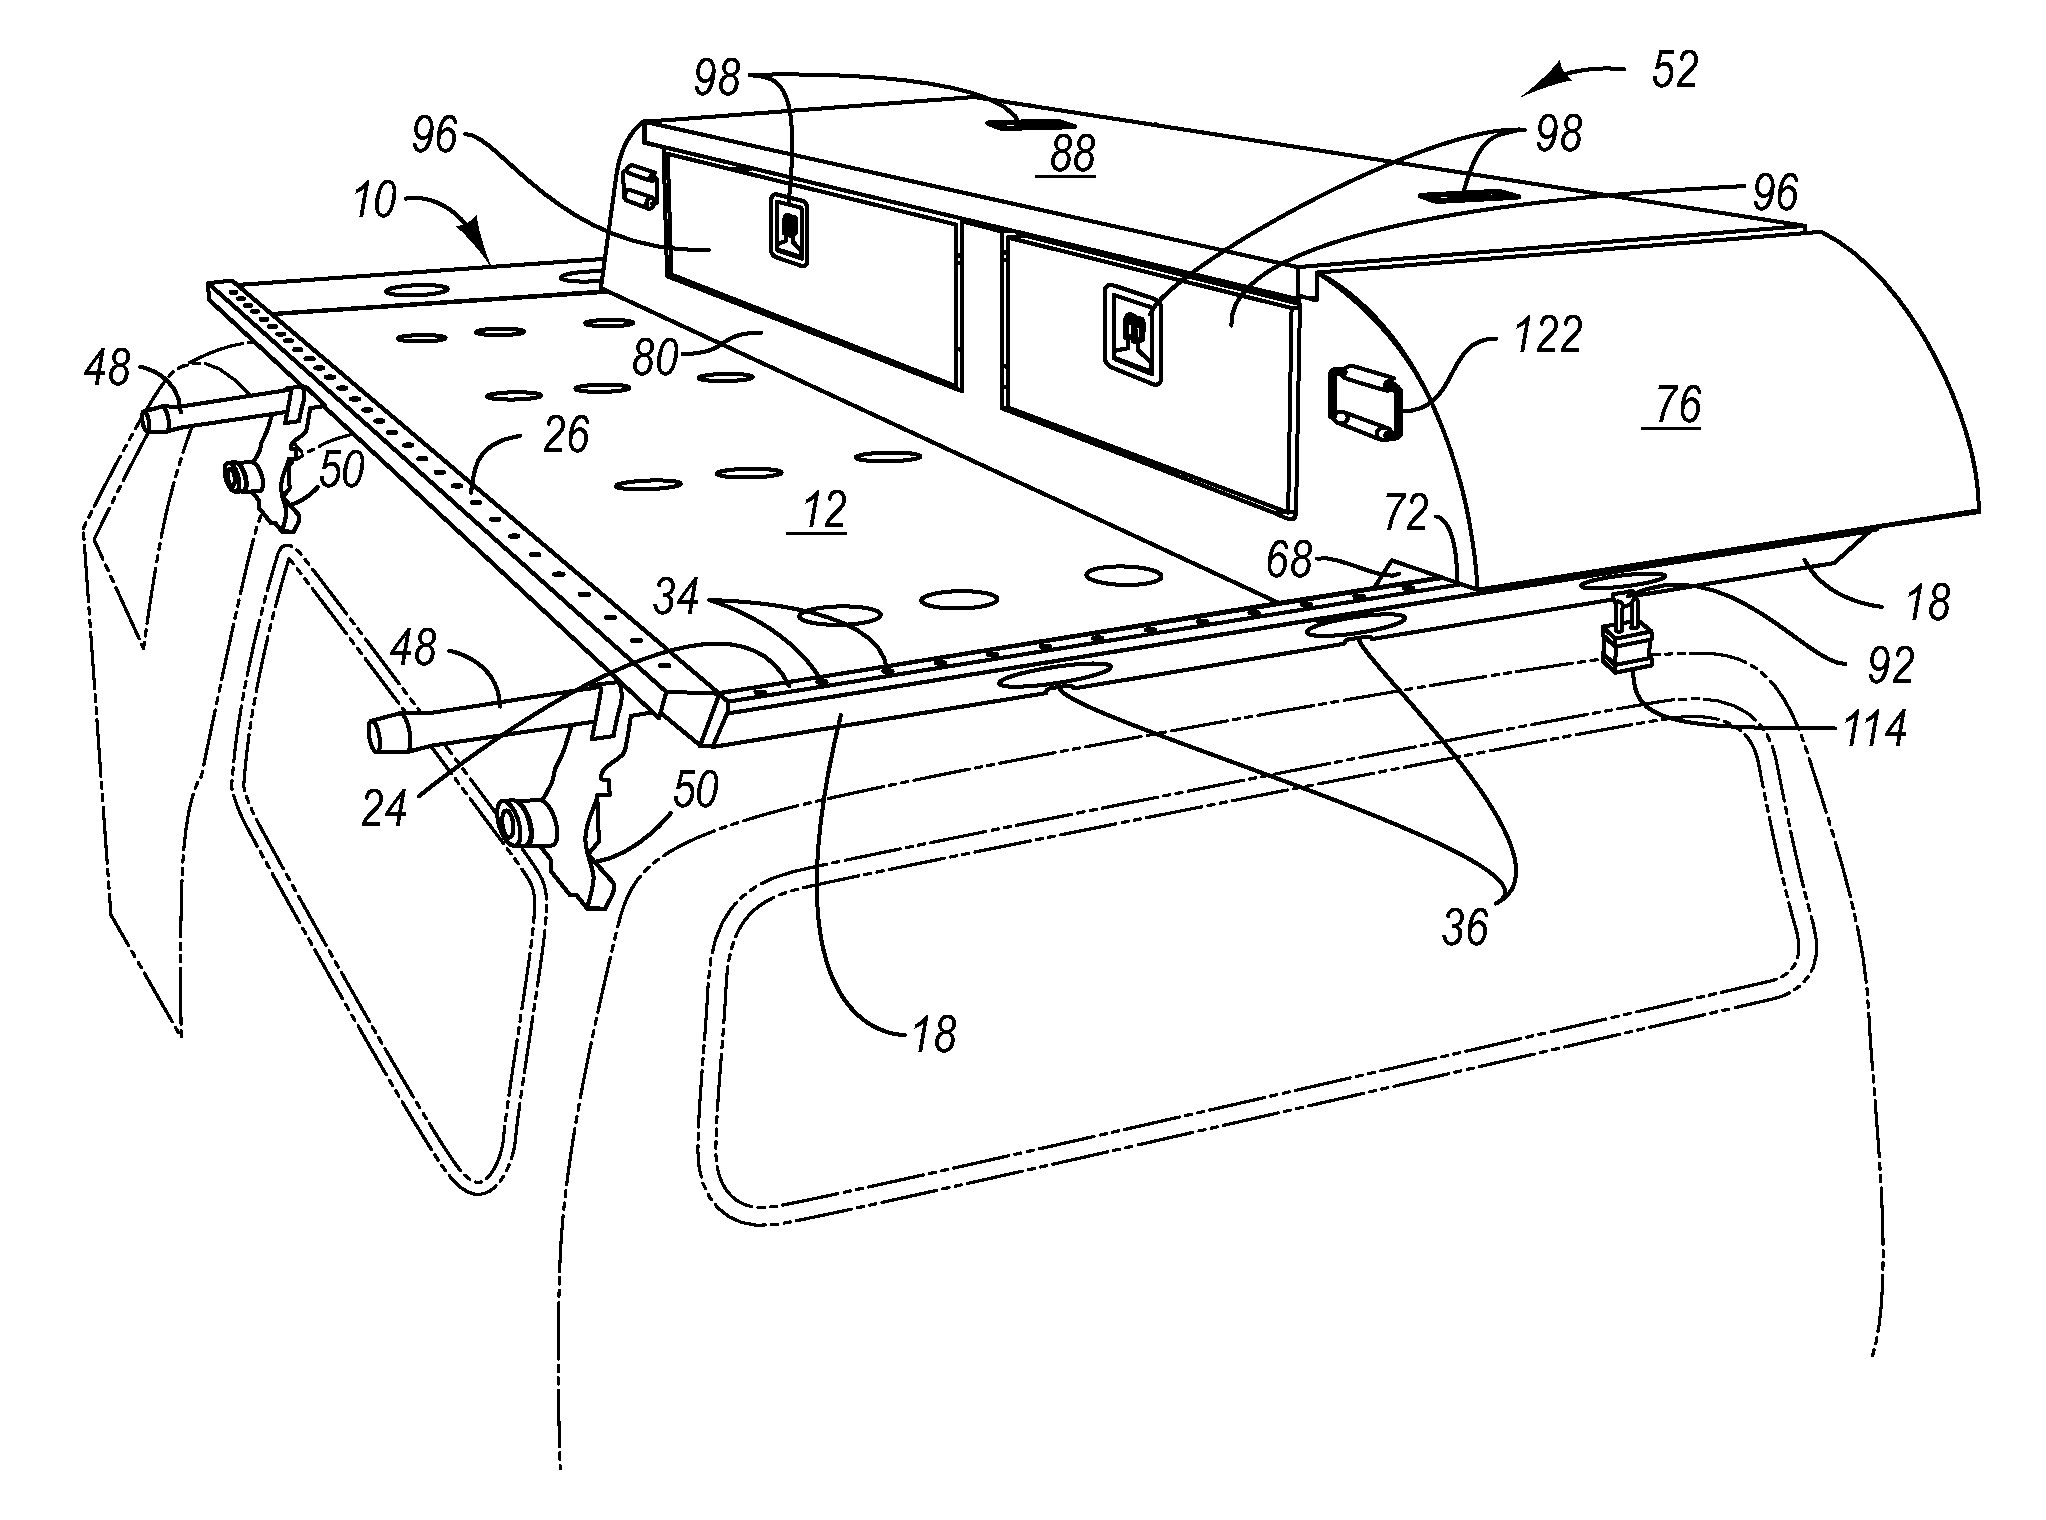 Load carrying system for motor vehicles